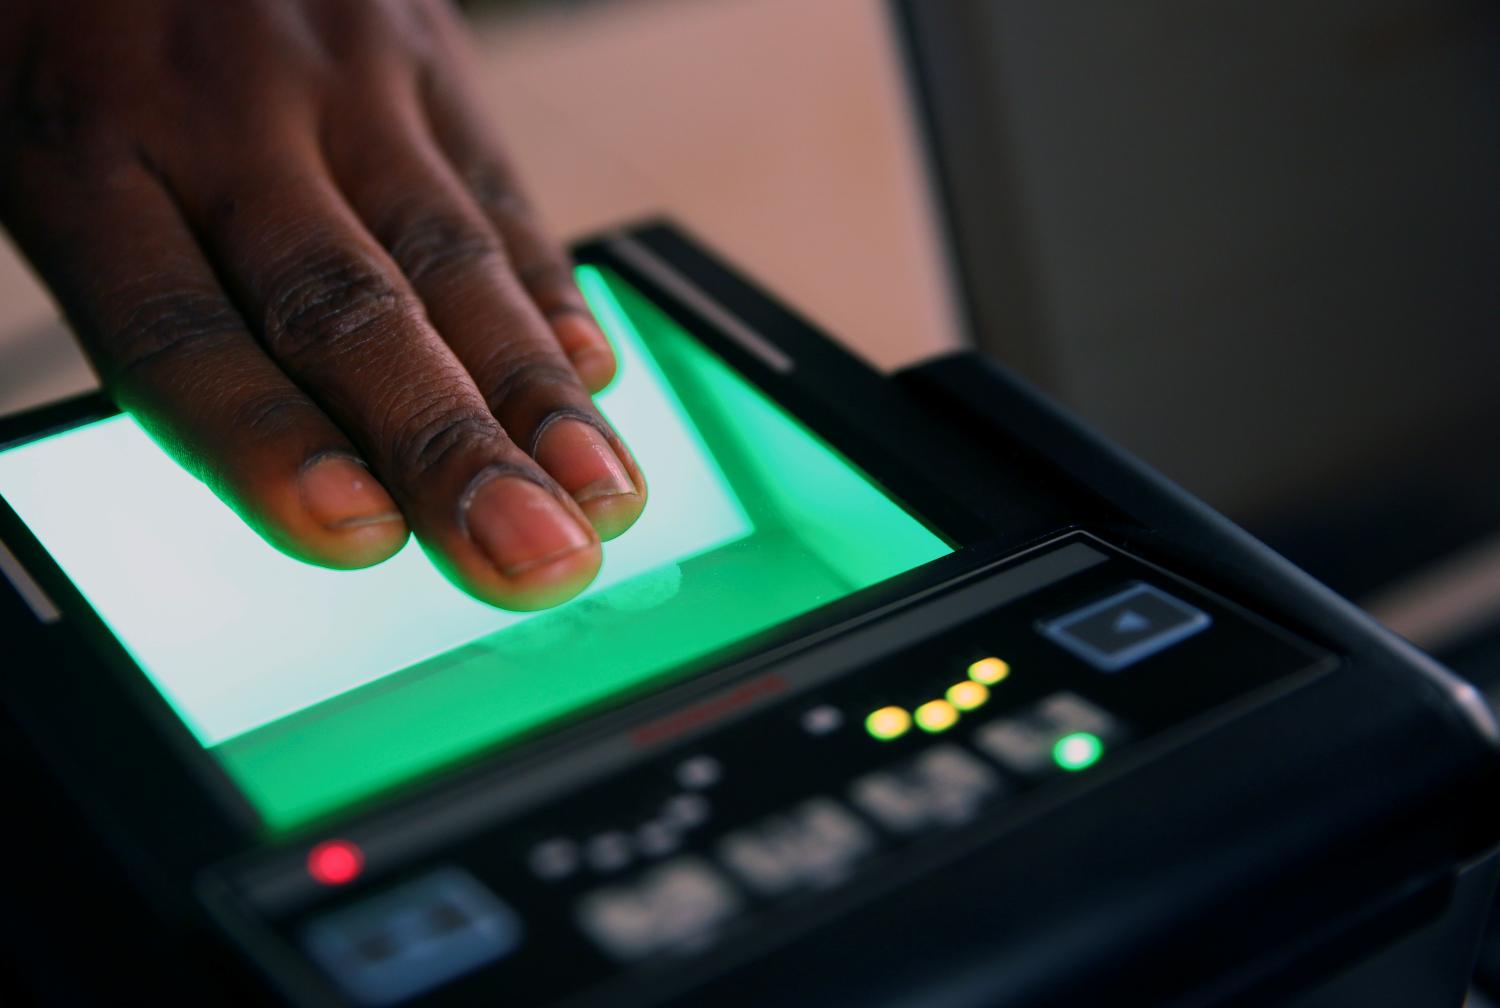 An official records finger prints of a person during voter's card registration for the country's 2019 presidential and general election, at the Independent National Electoral Commission (INEC) in Karu district in Abuja, Nigeria January 31, 2018. REUTERS/Afolabi Sotunde - RC17CD6DFB00